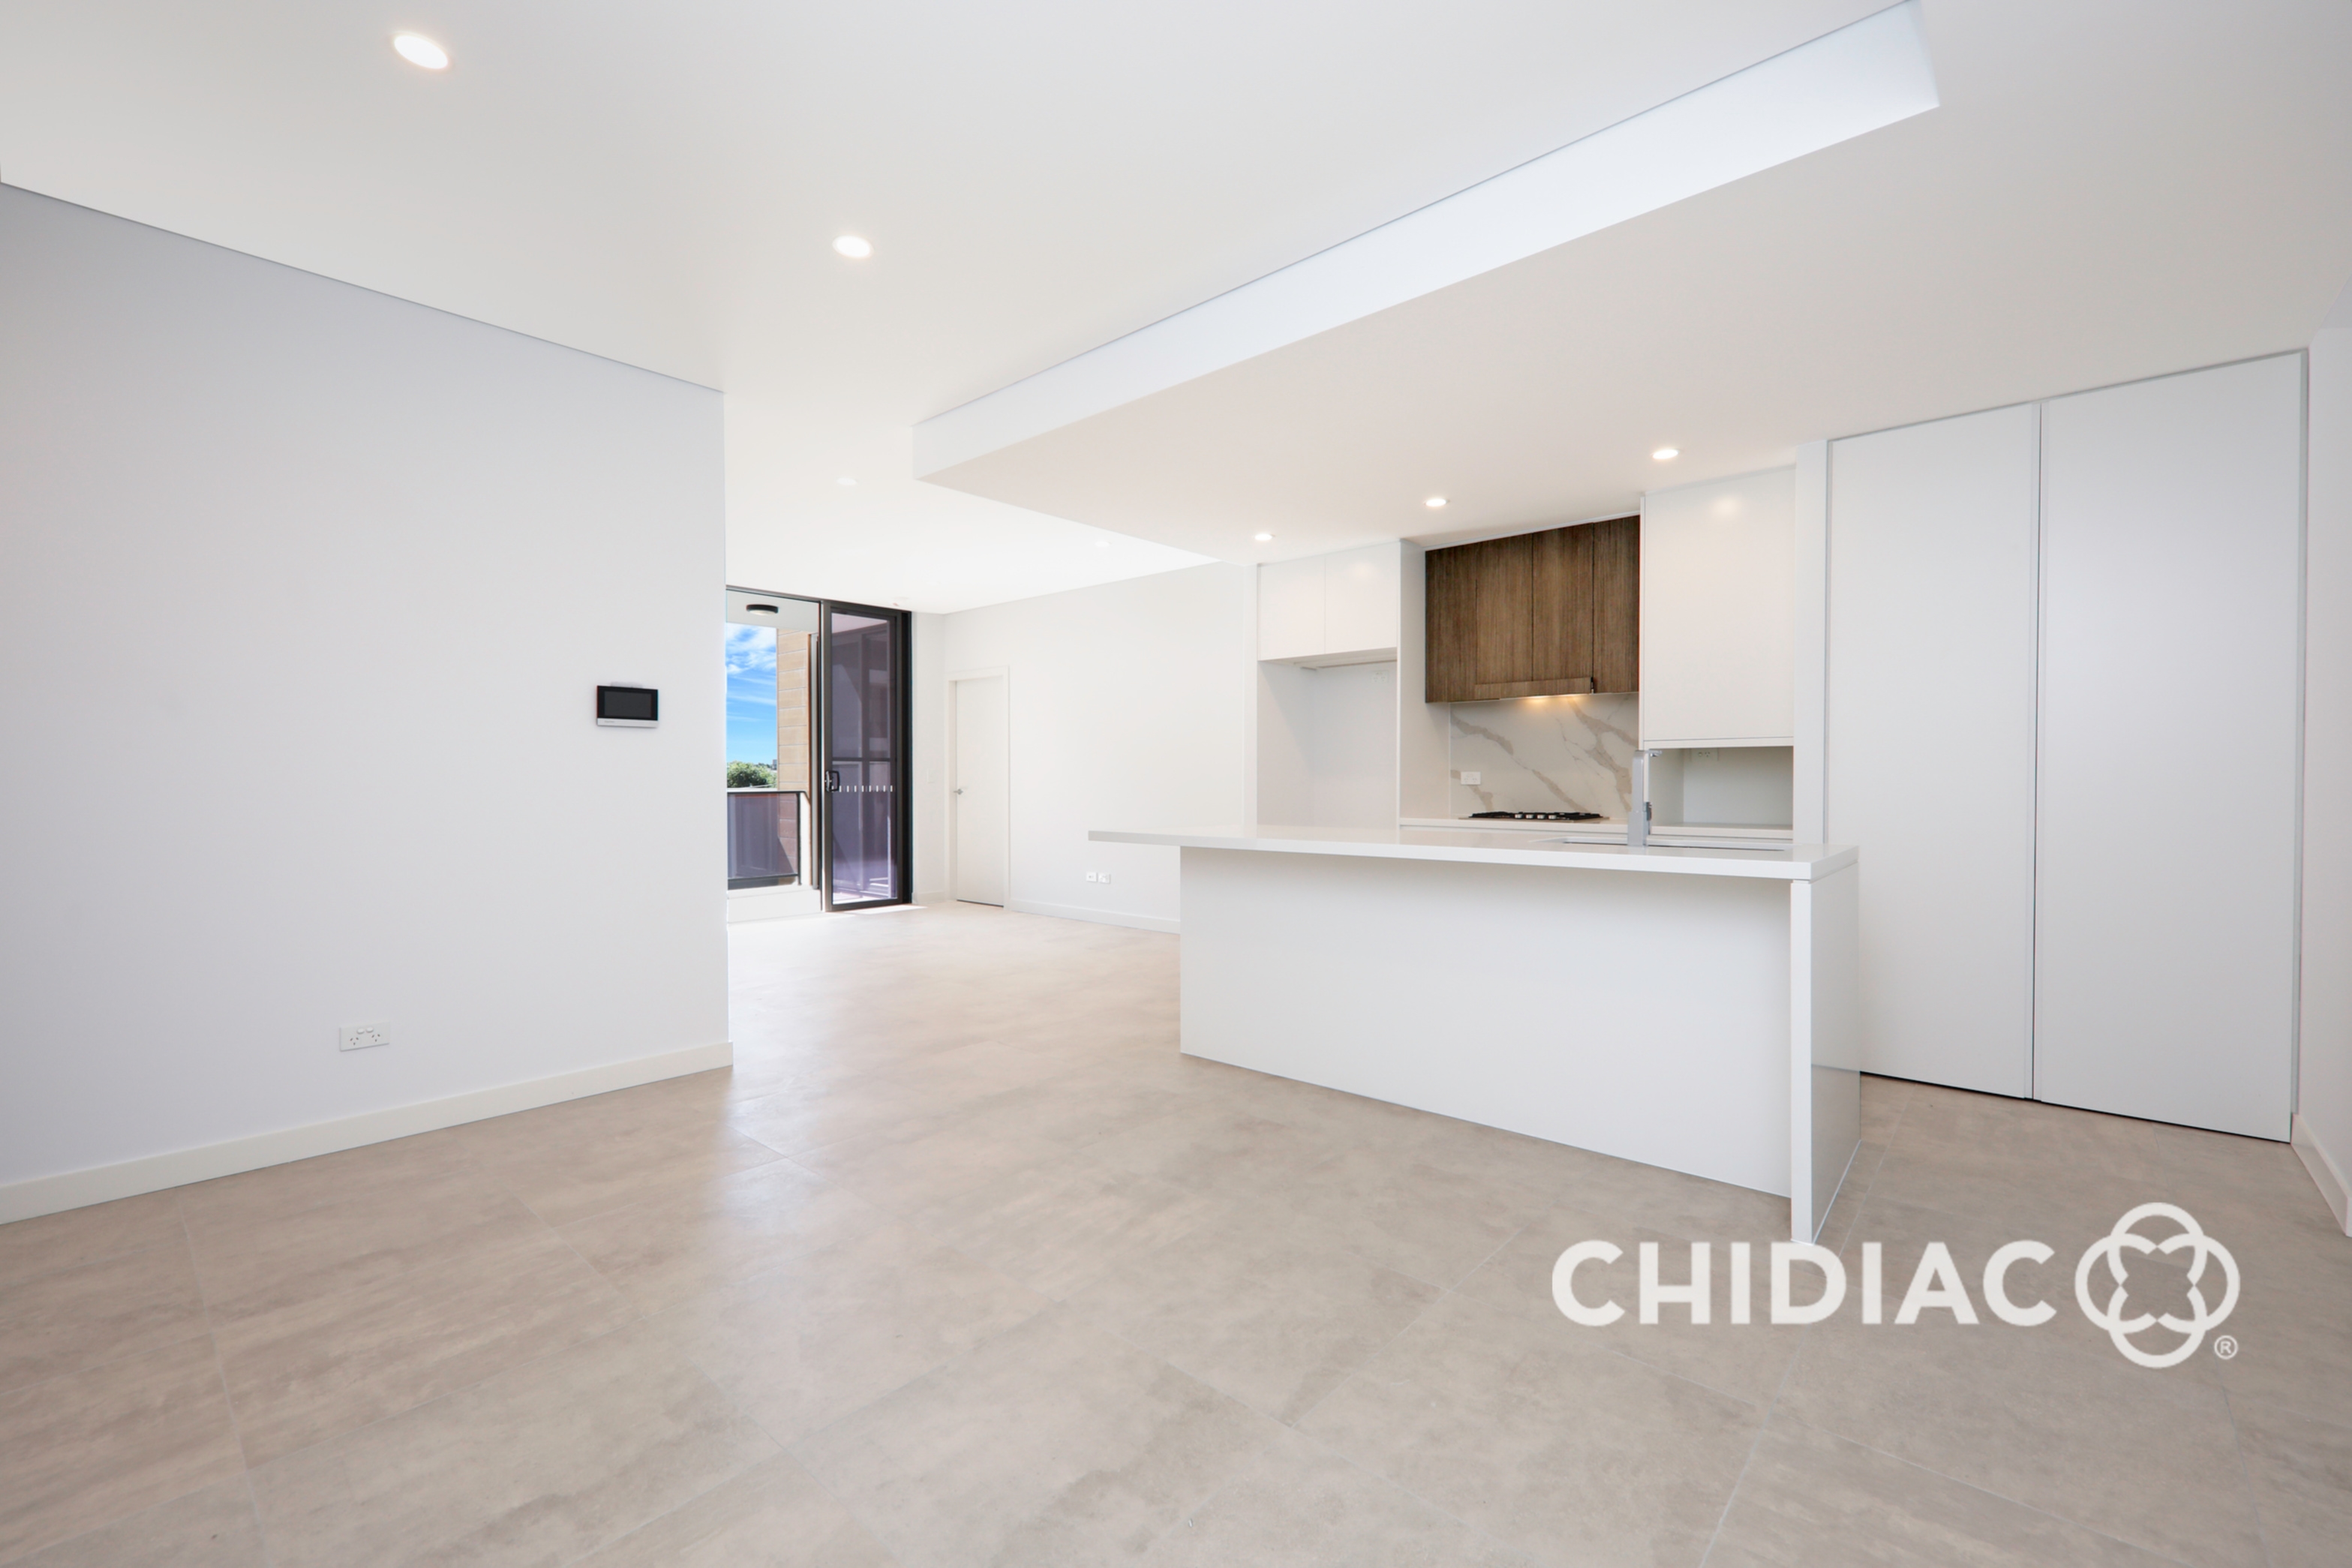 3br/9-13 Goulburn Street, Liverpool Leased by Chidiac Realty - image 3